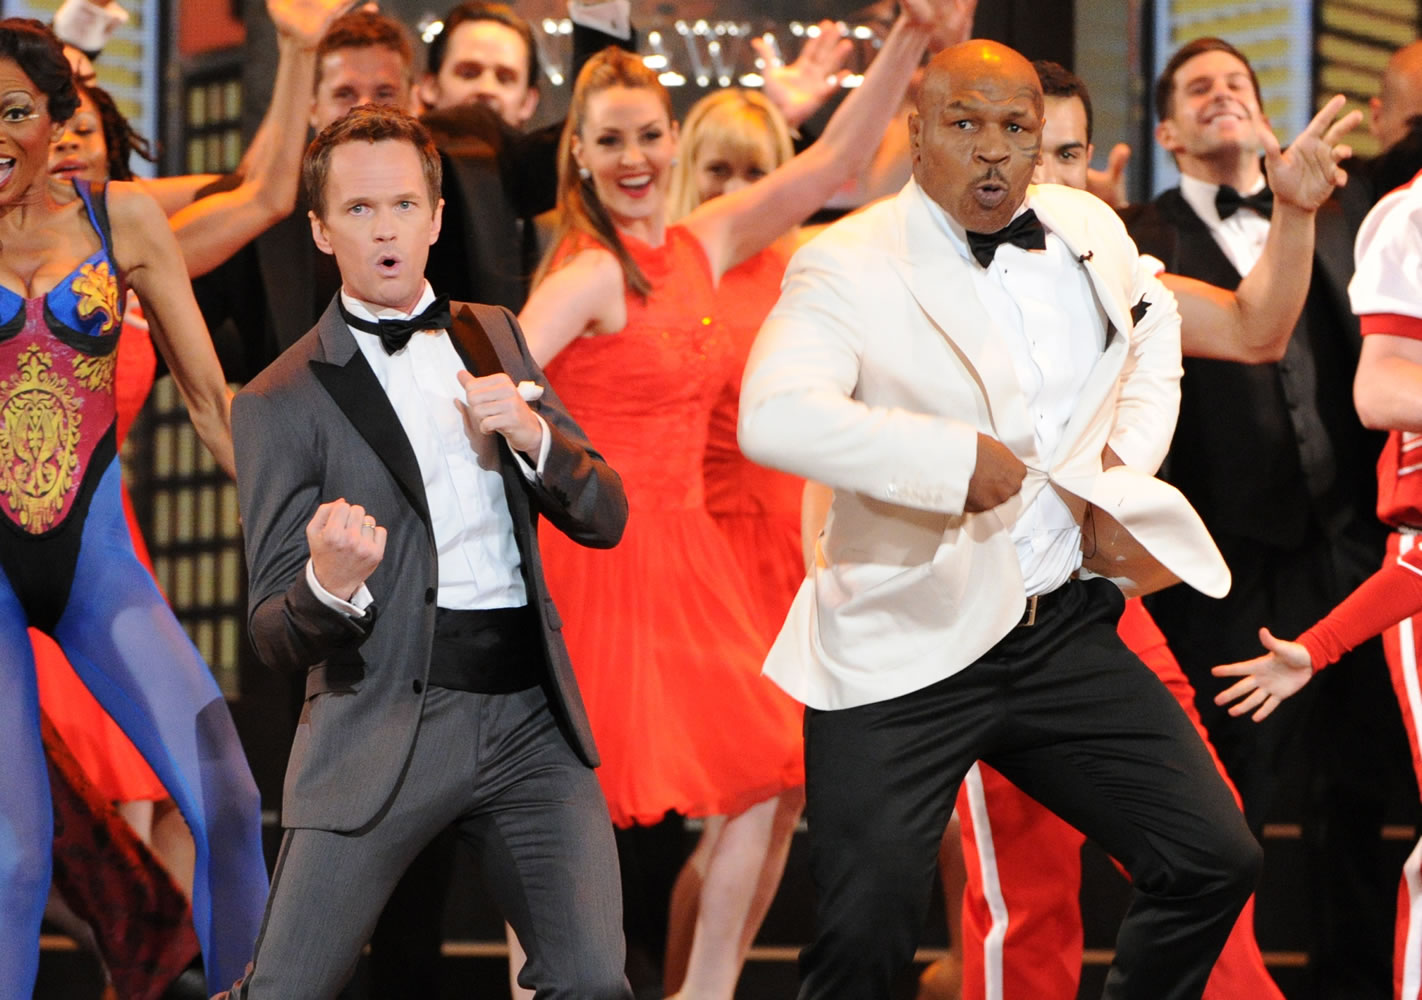 Actor Neil Patrick Harris, left, and Mike Tyson perform Sunday at the 67th Annual Tony Awards in New York.